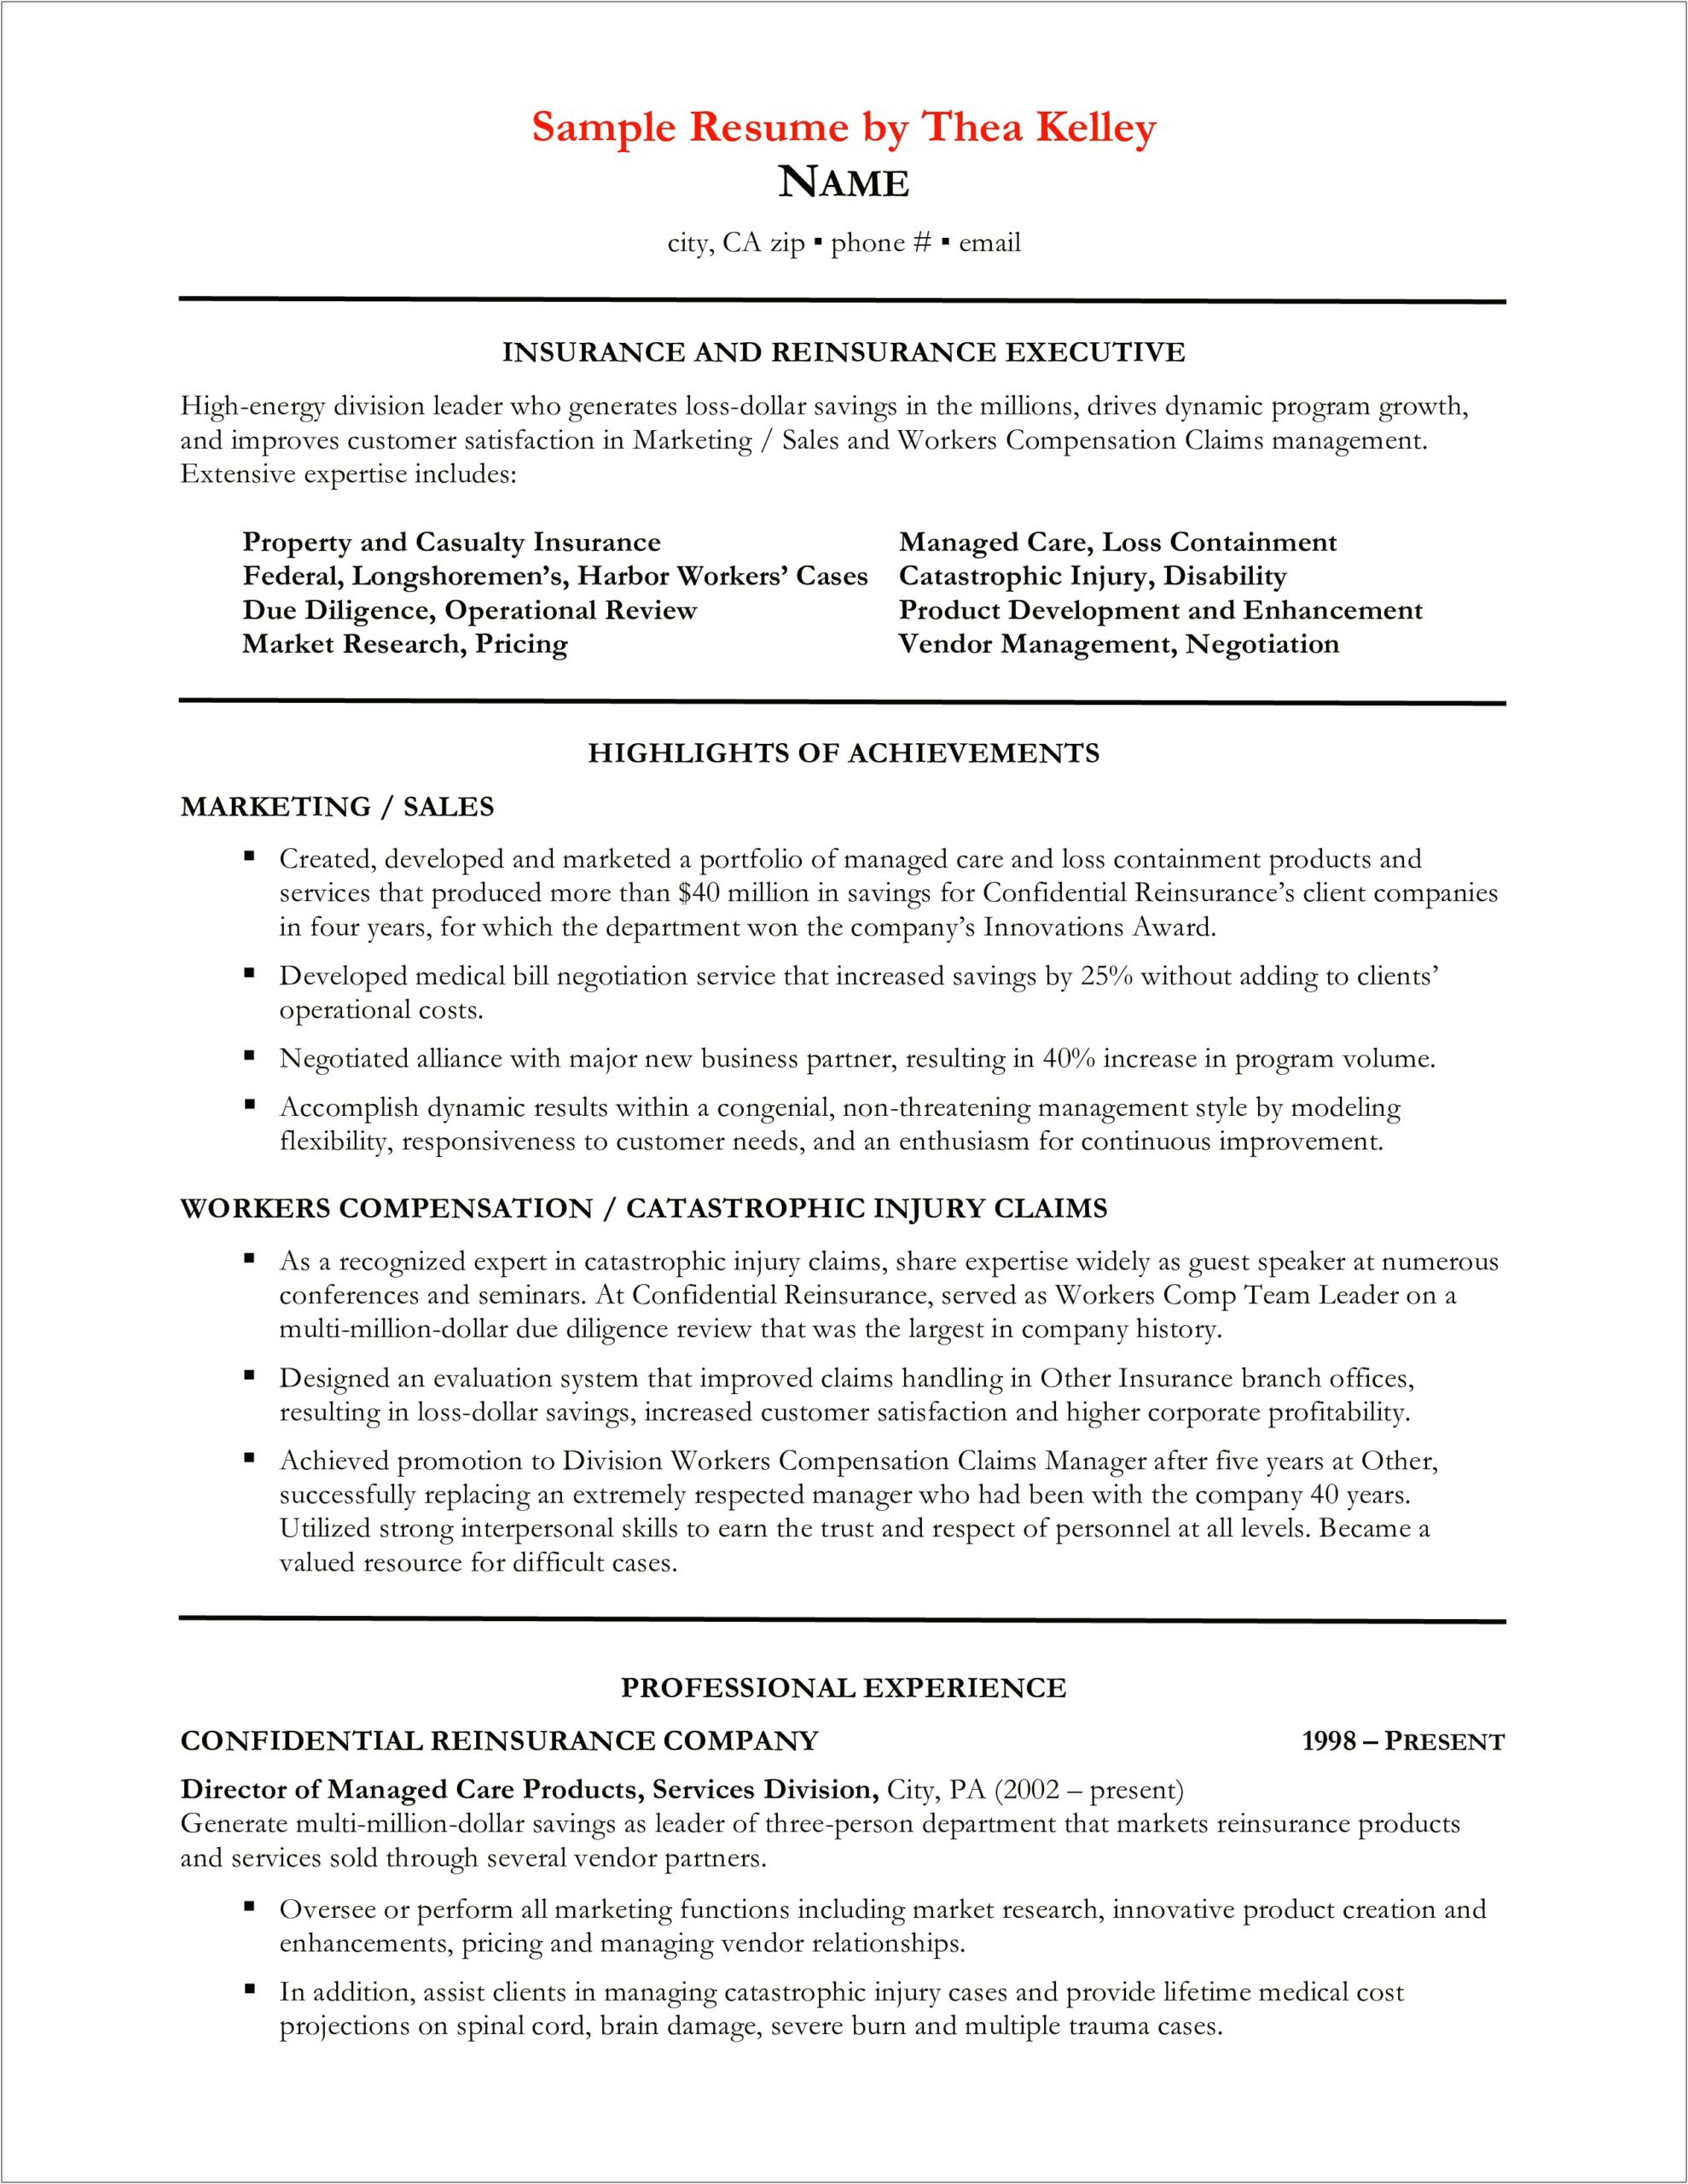 Sample Resume Of Director Of Disability